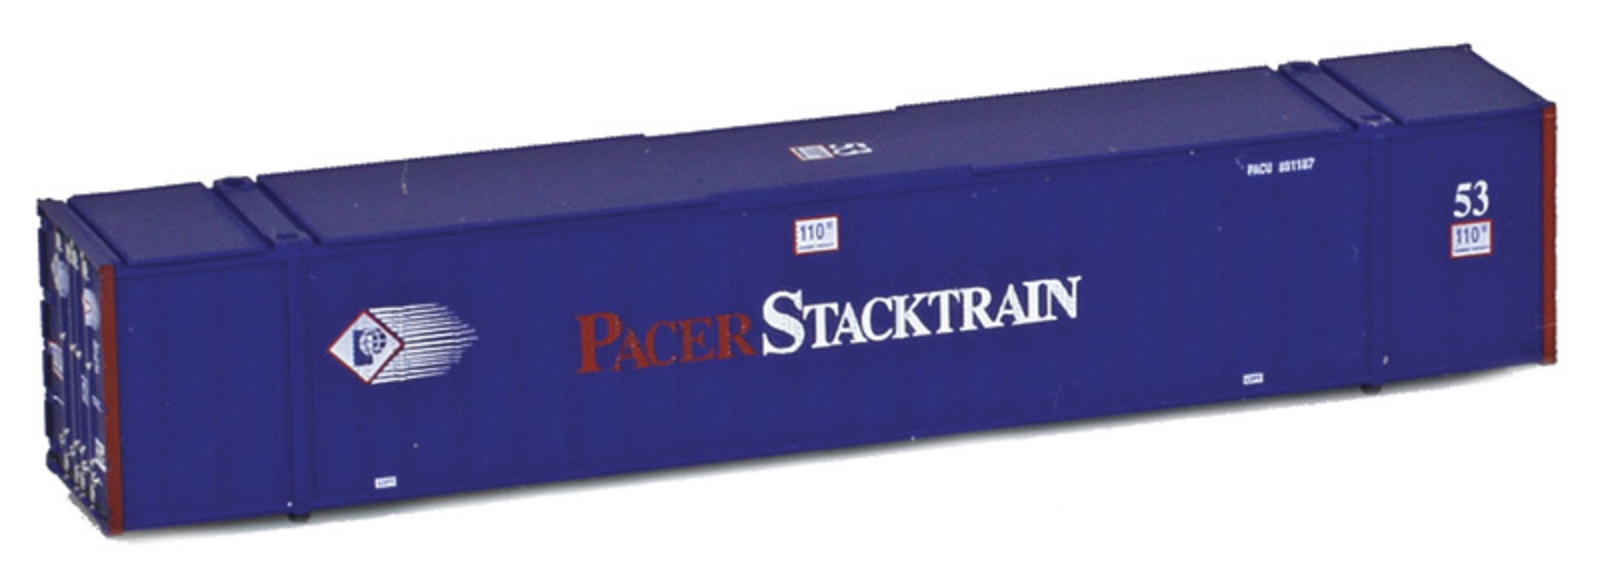 Z Scale - AZL - 95109 - Container, 53 Foot - Pacer StackTrain